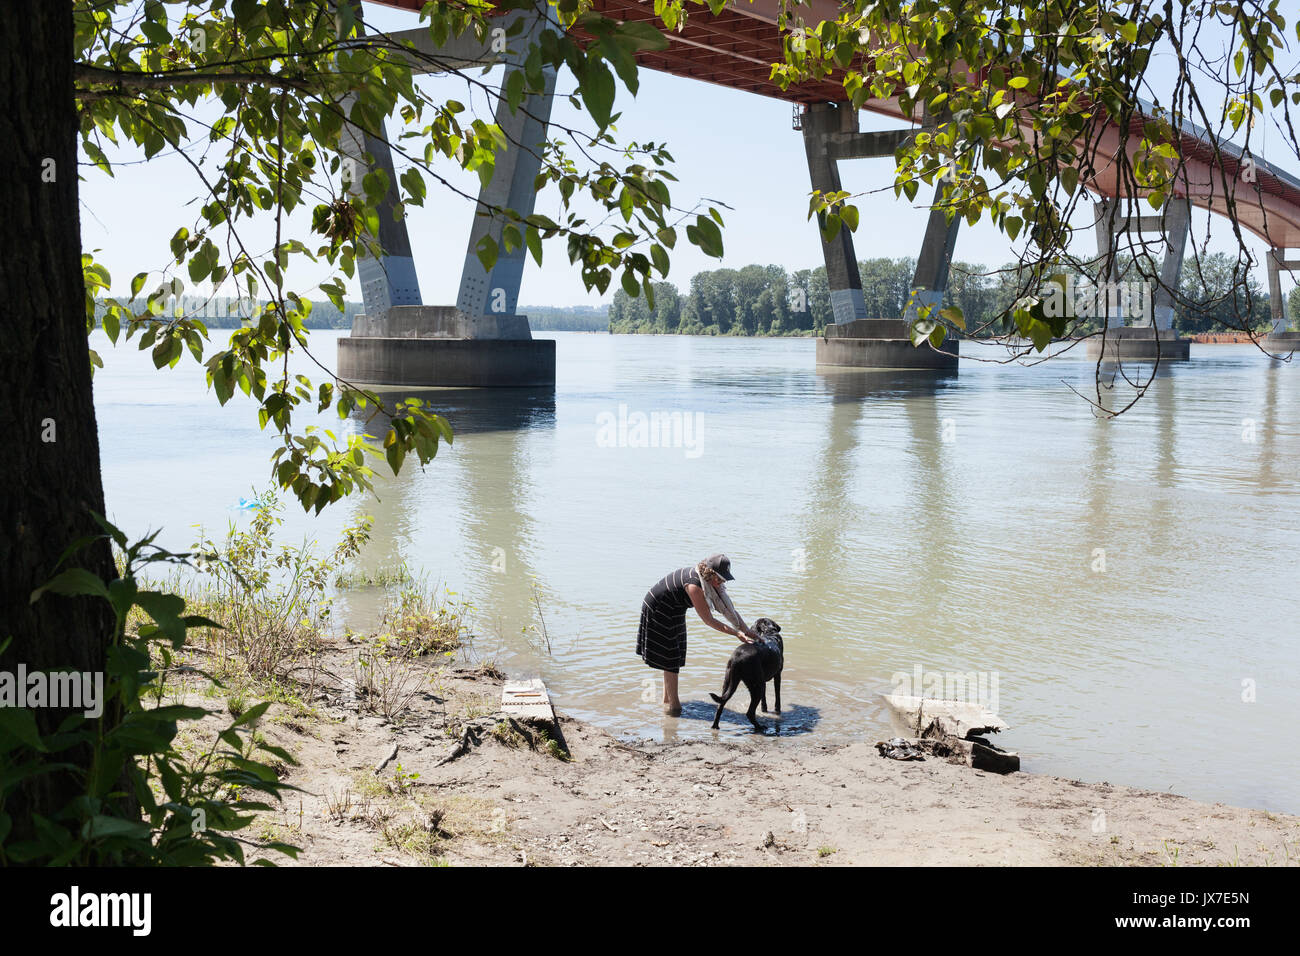 Woman cooling down her dog at river on hot day.   Mission, BC Canada Stock Photo